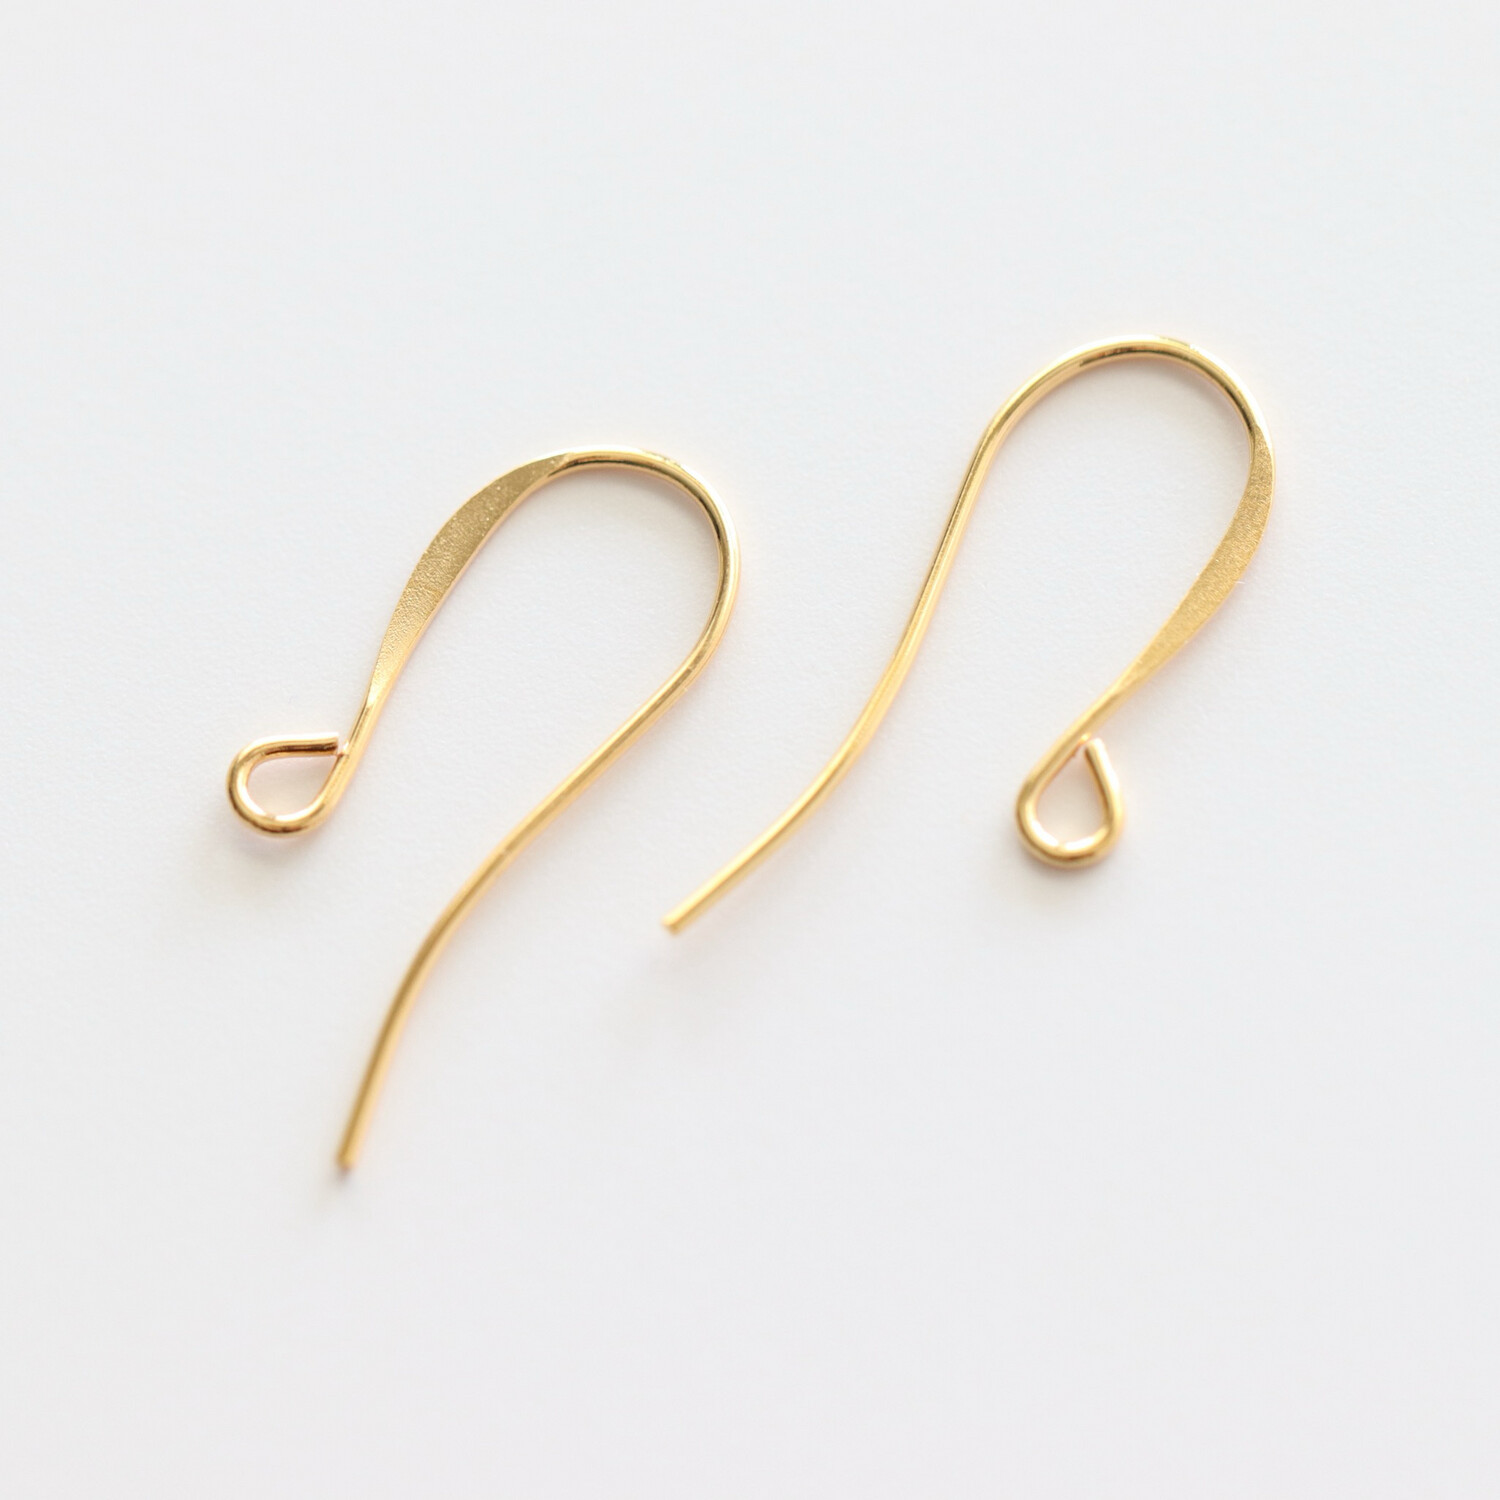 Gold-plated Brass Ear Wires - 18mm Flat Fishhook with Open Loop / 10 pairs (20 pieces)